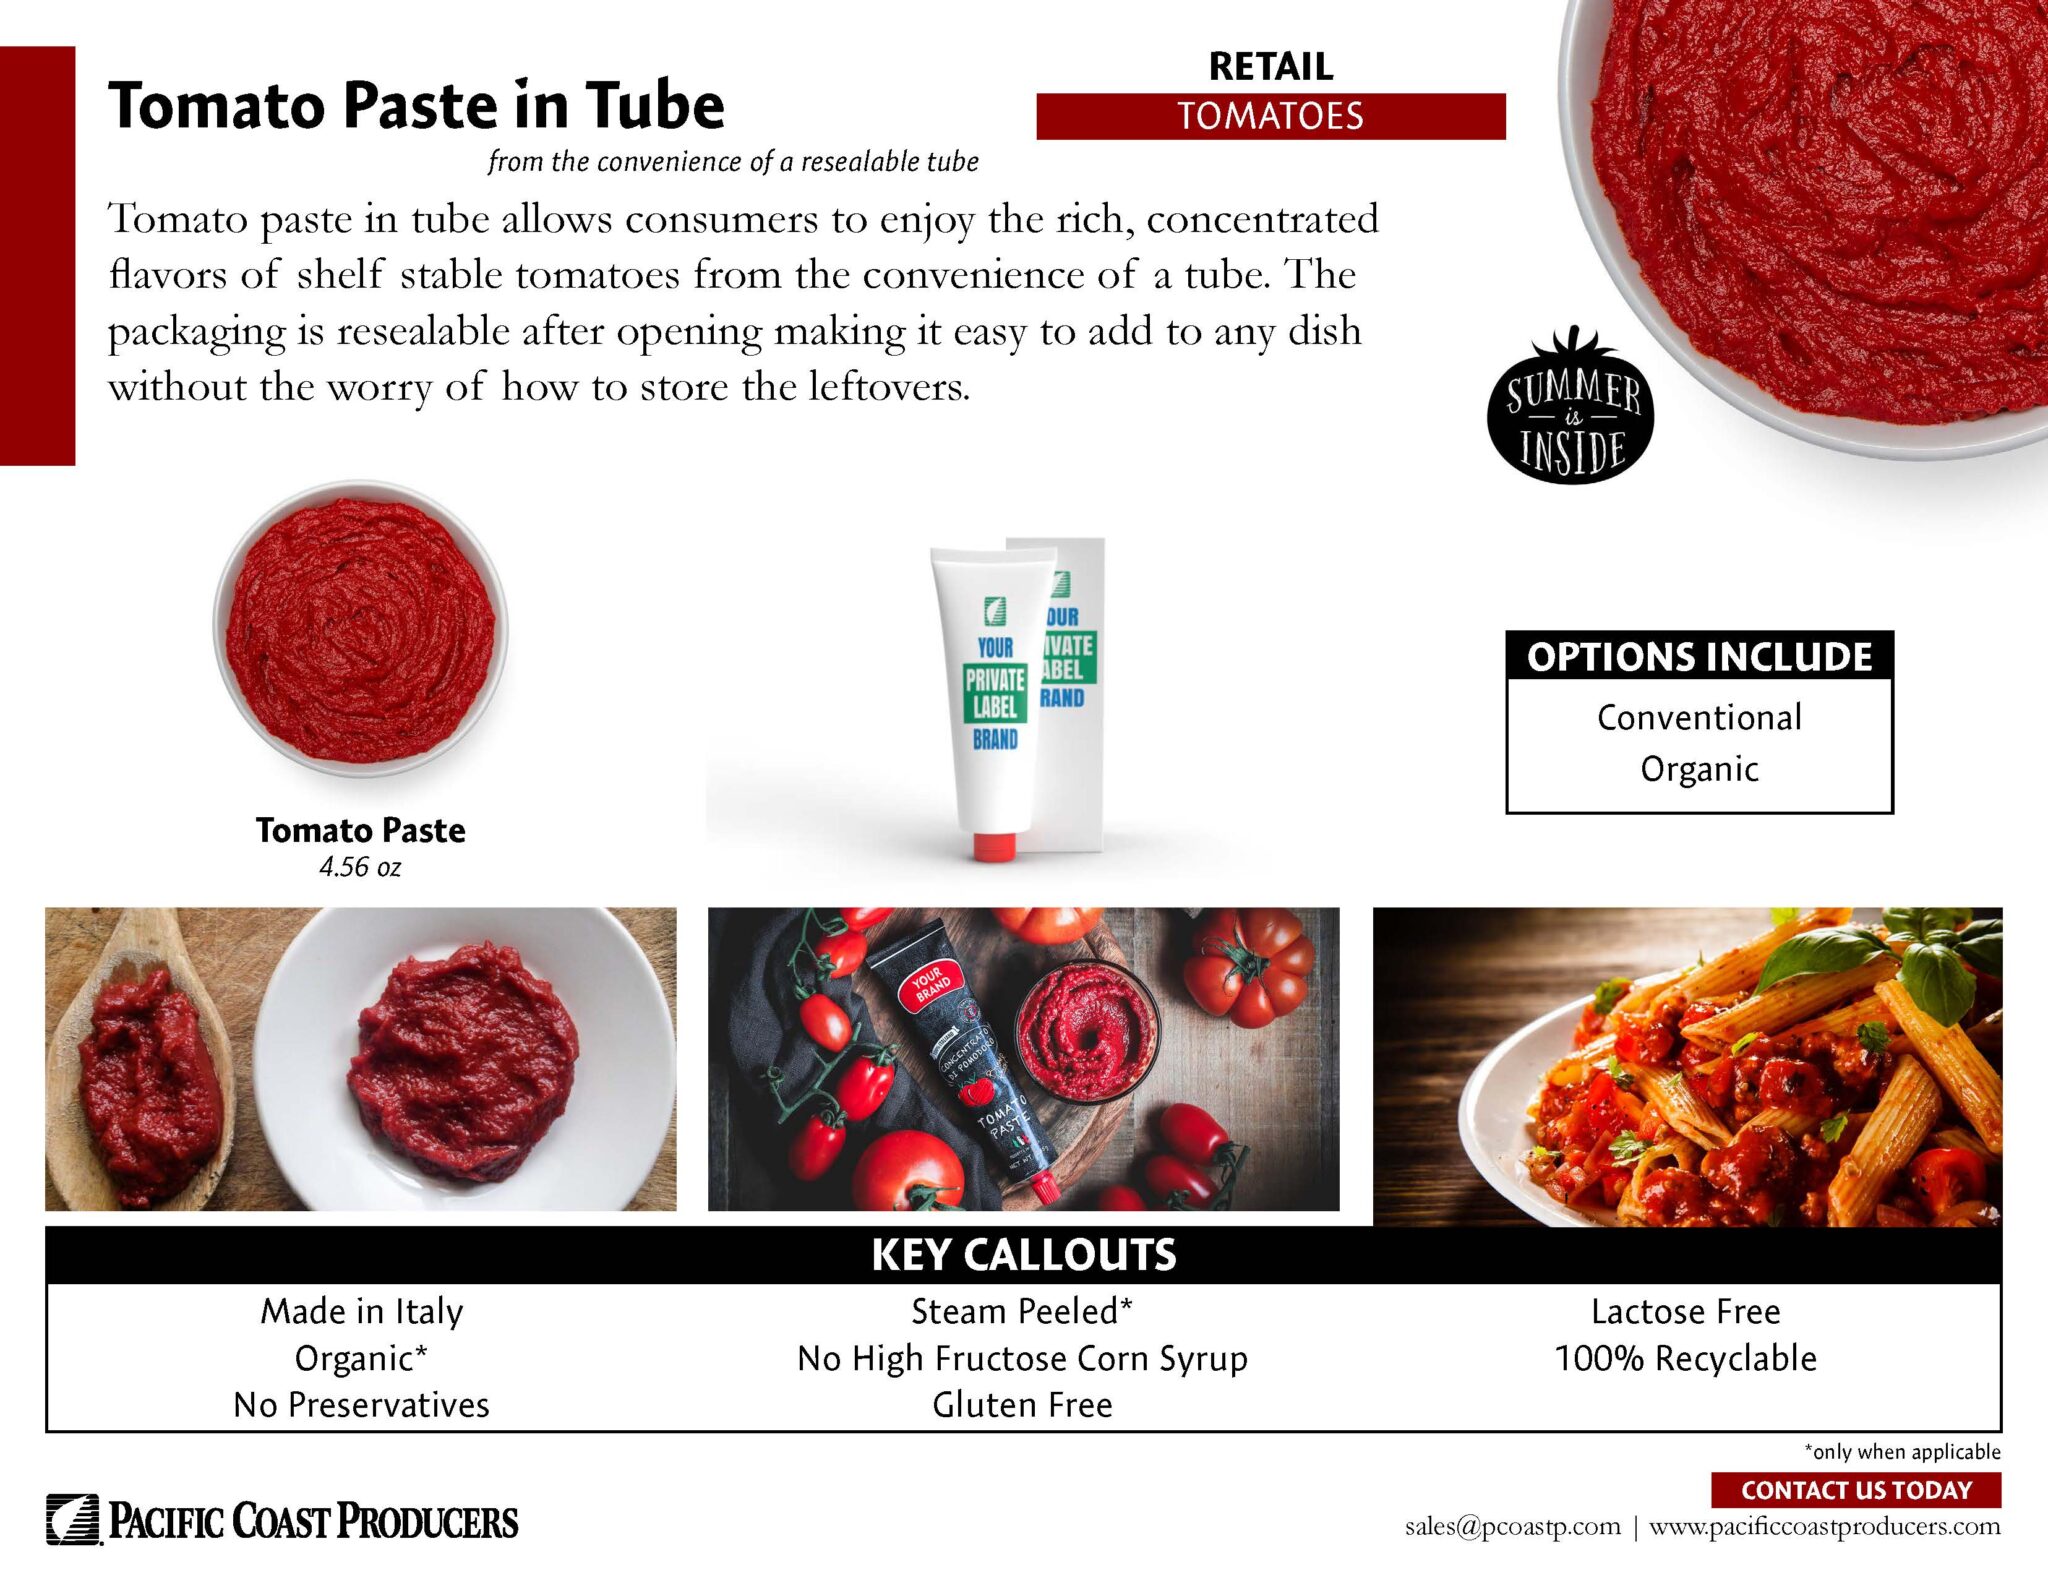 Tomato paste infographic highlighting retail advantages of tube packaging.